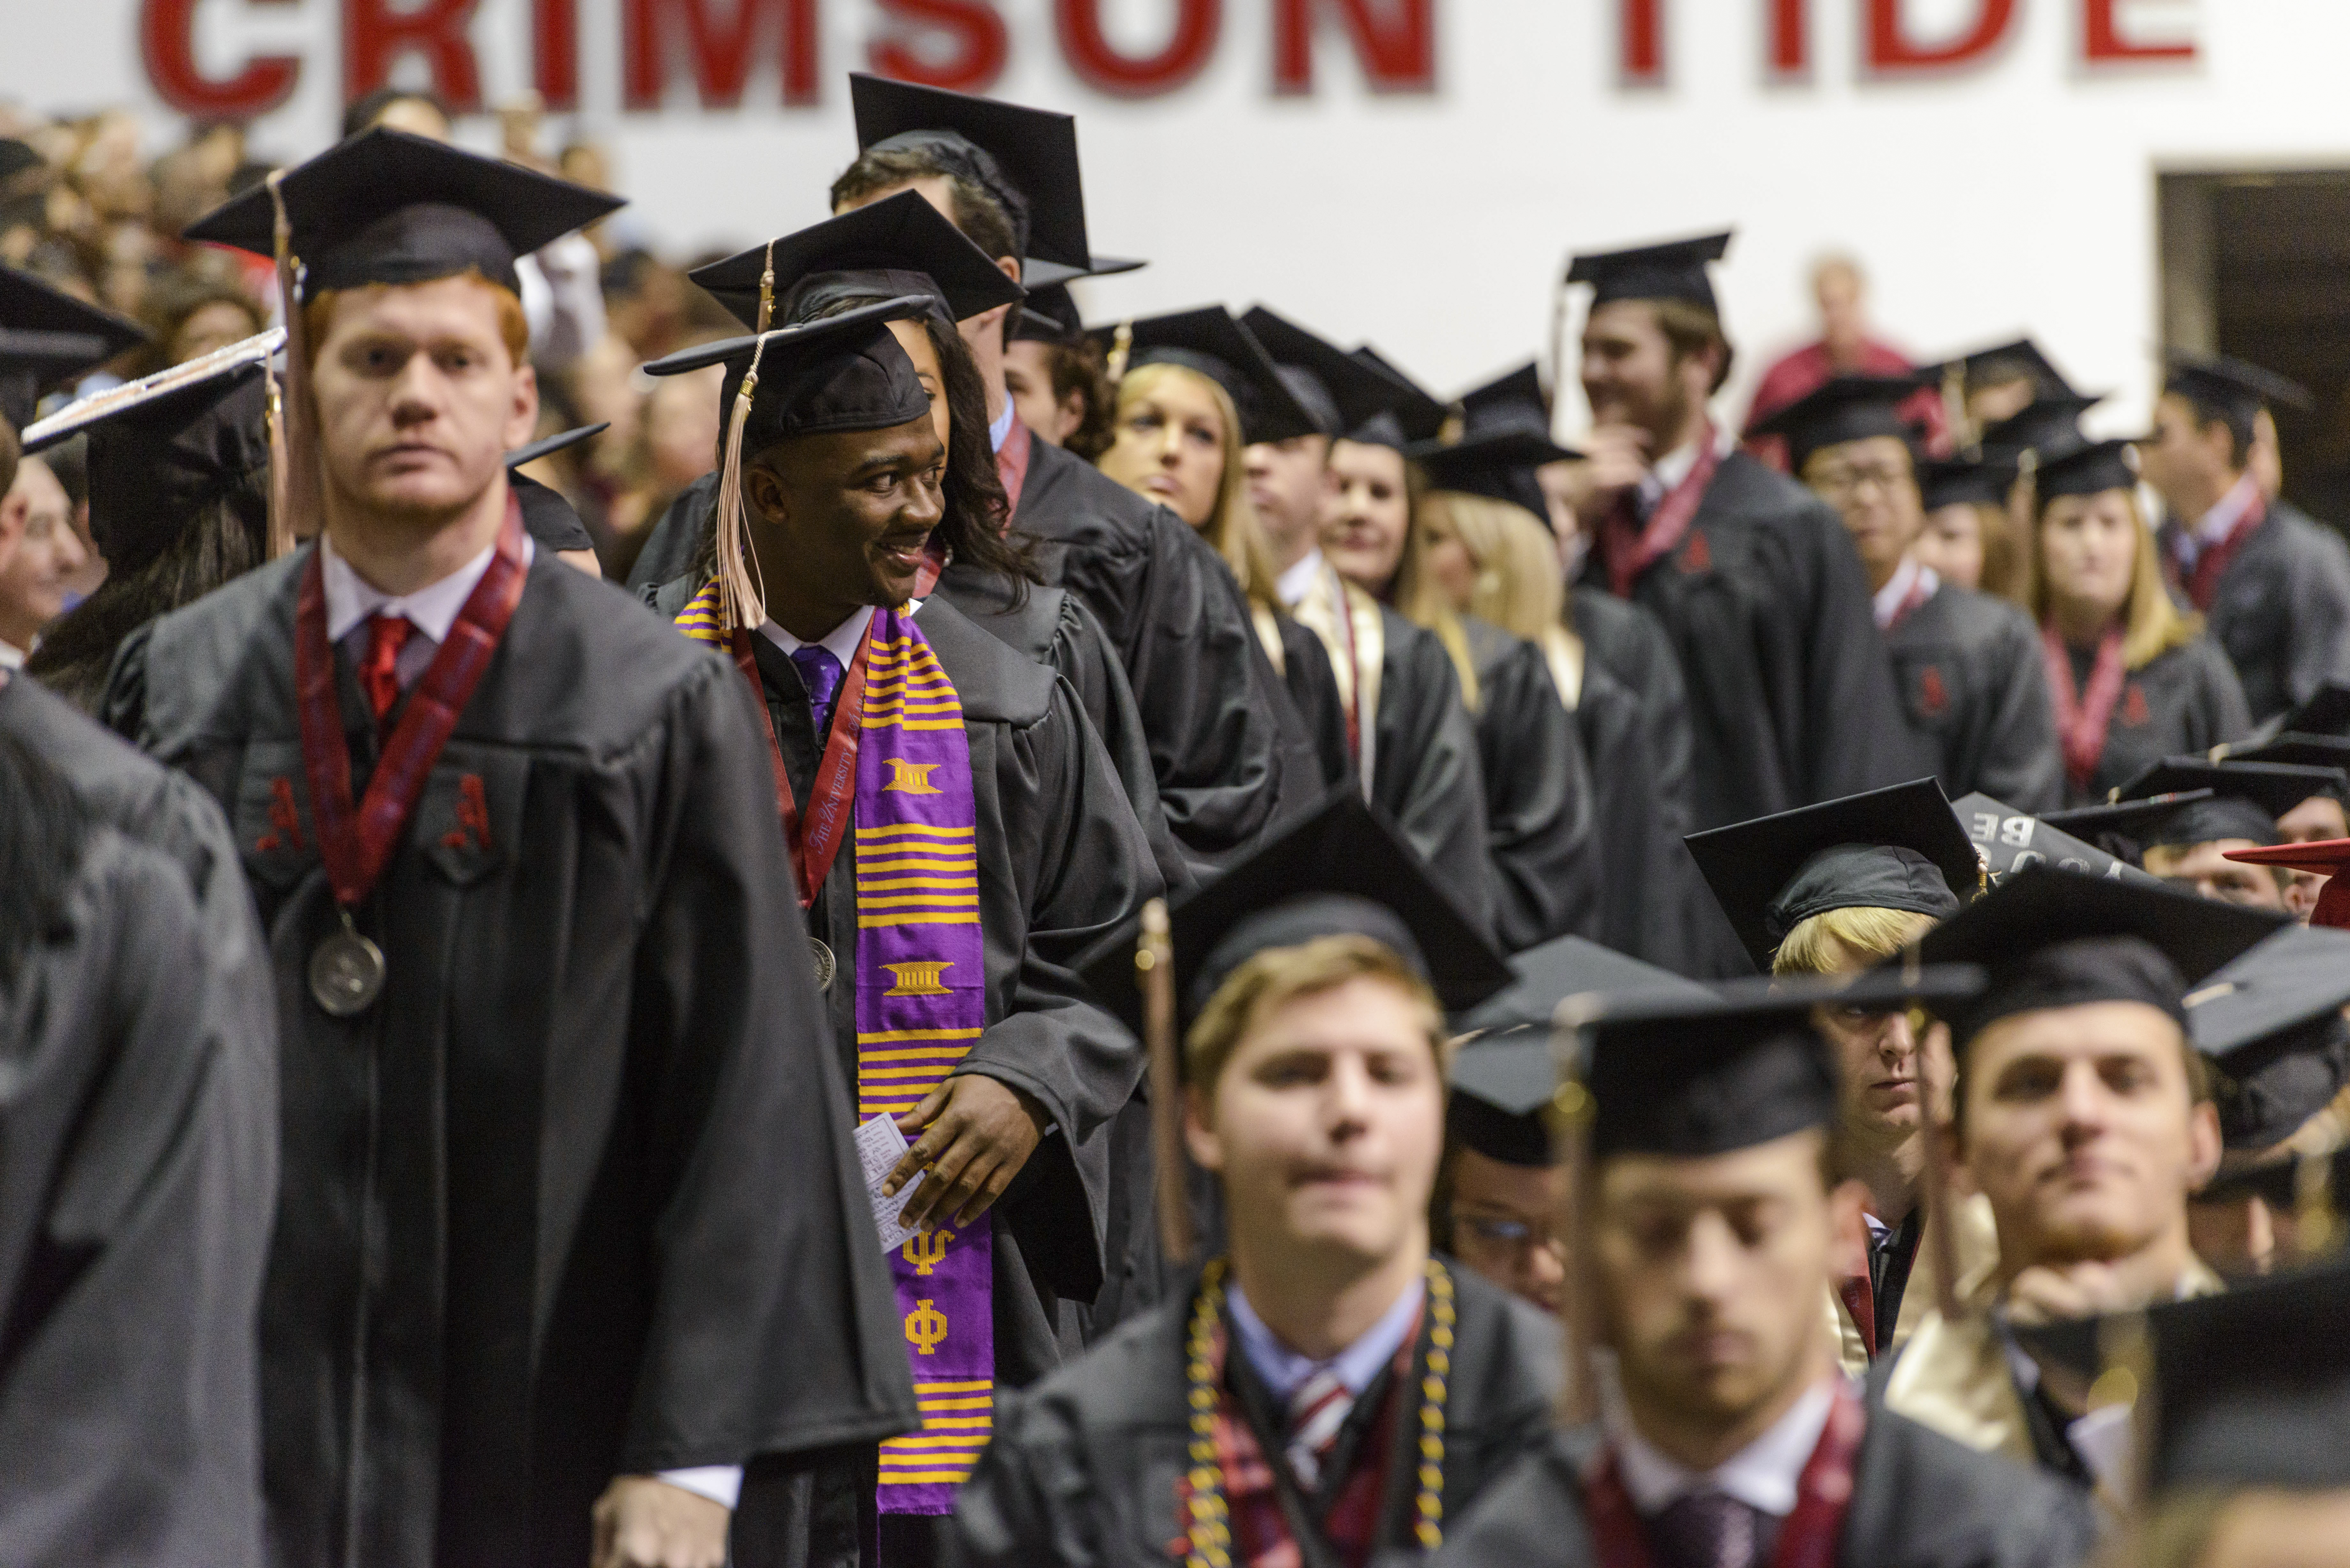 UA to Hold Spring Commencement Exercises